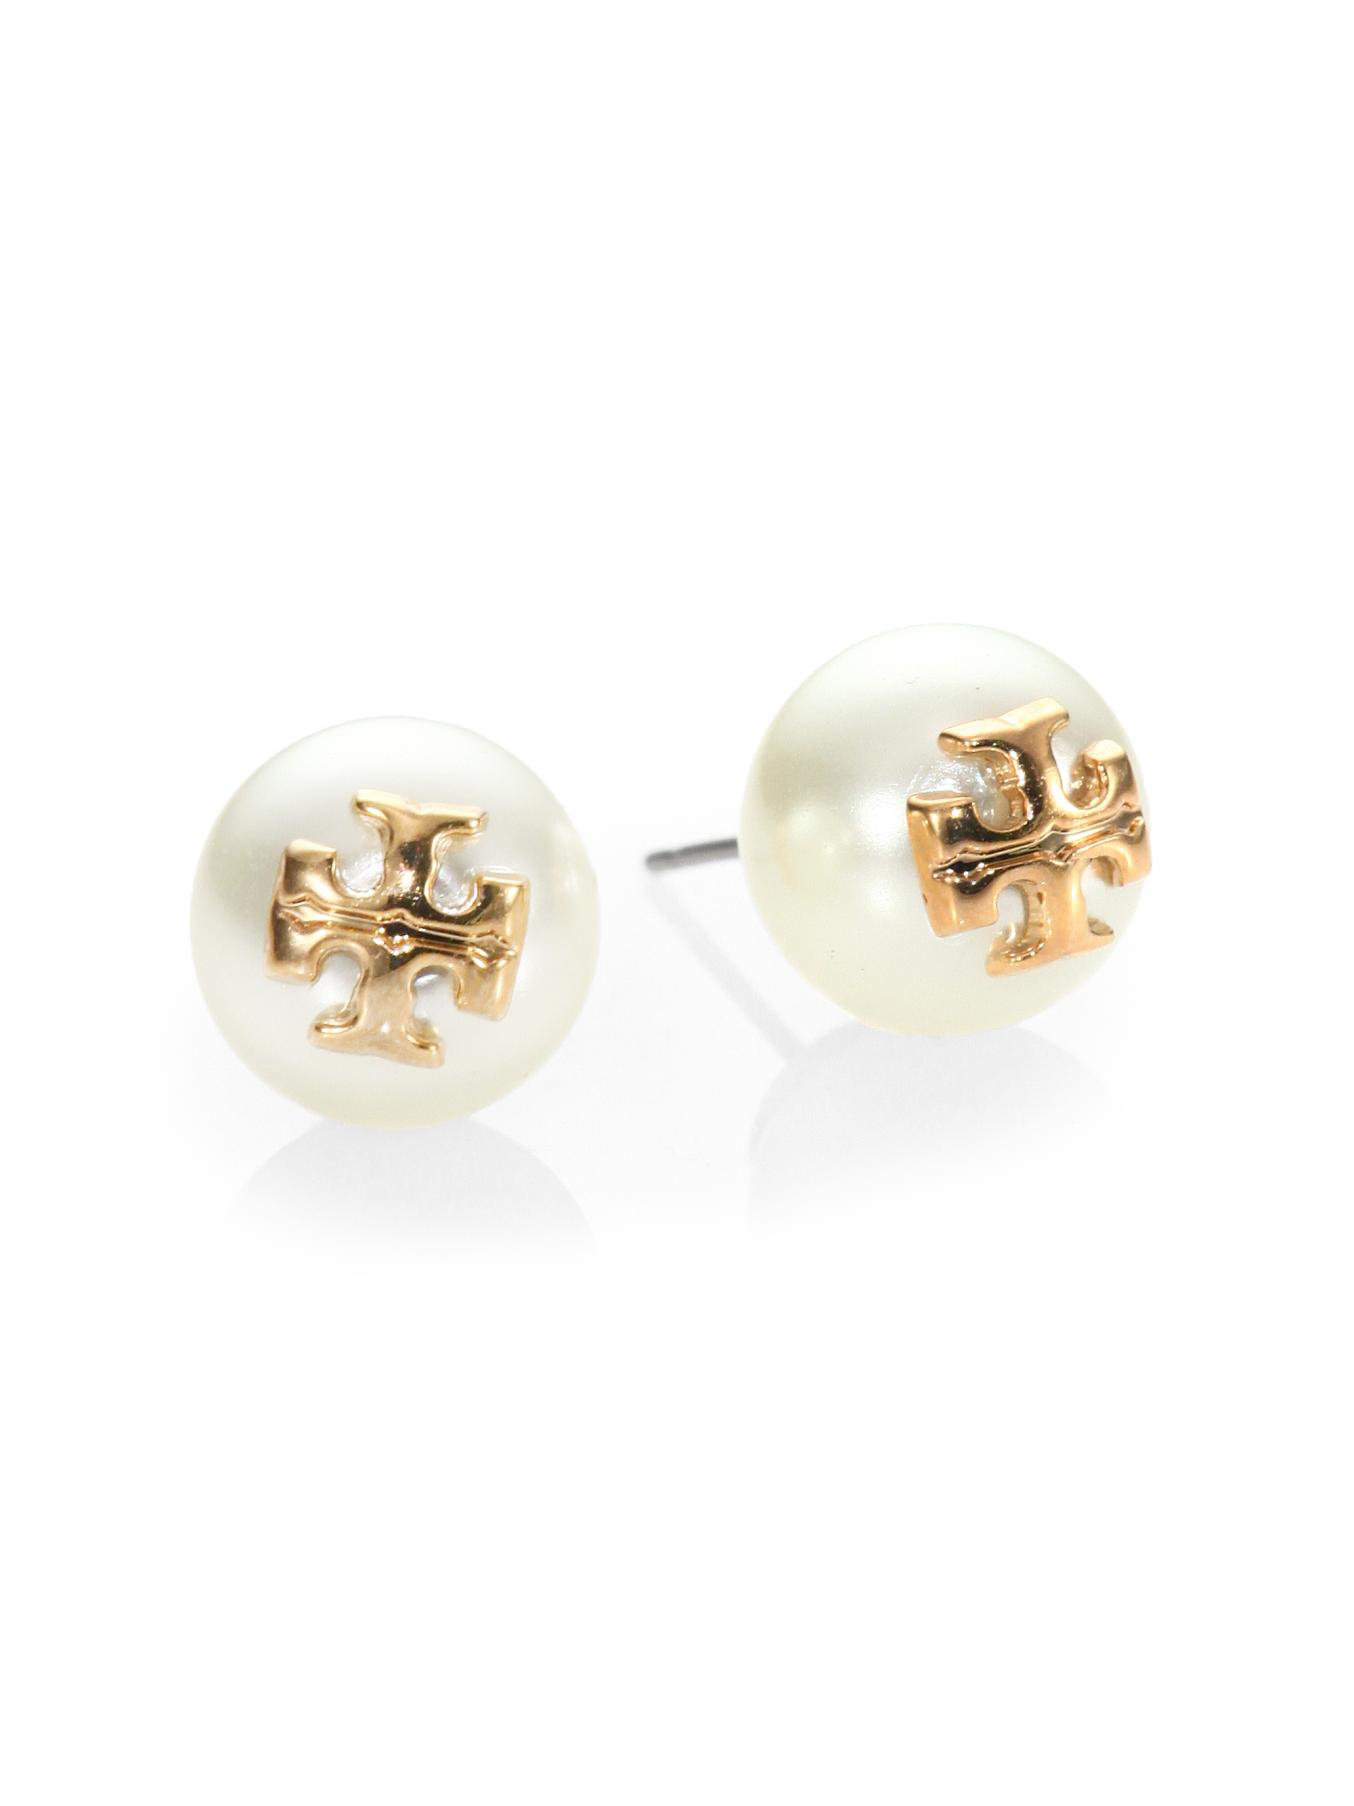 Tory Burch Evie Ivory Crystal Pearl Stud Earrings with T-Logo